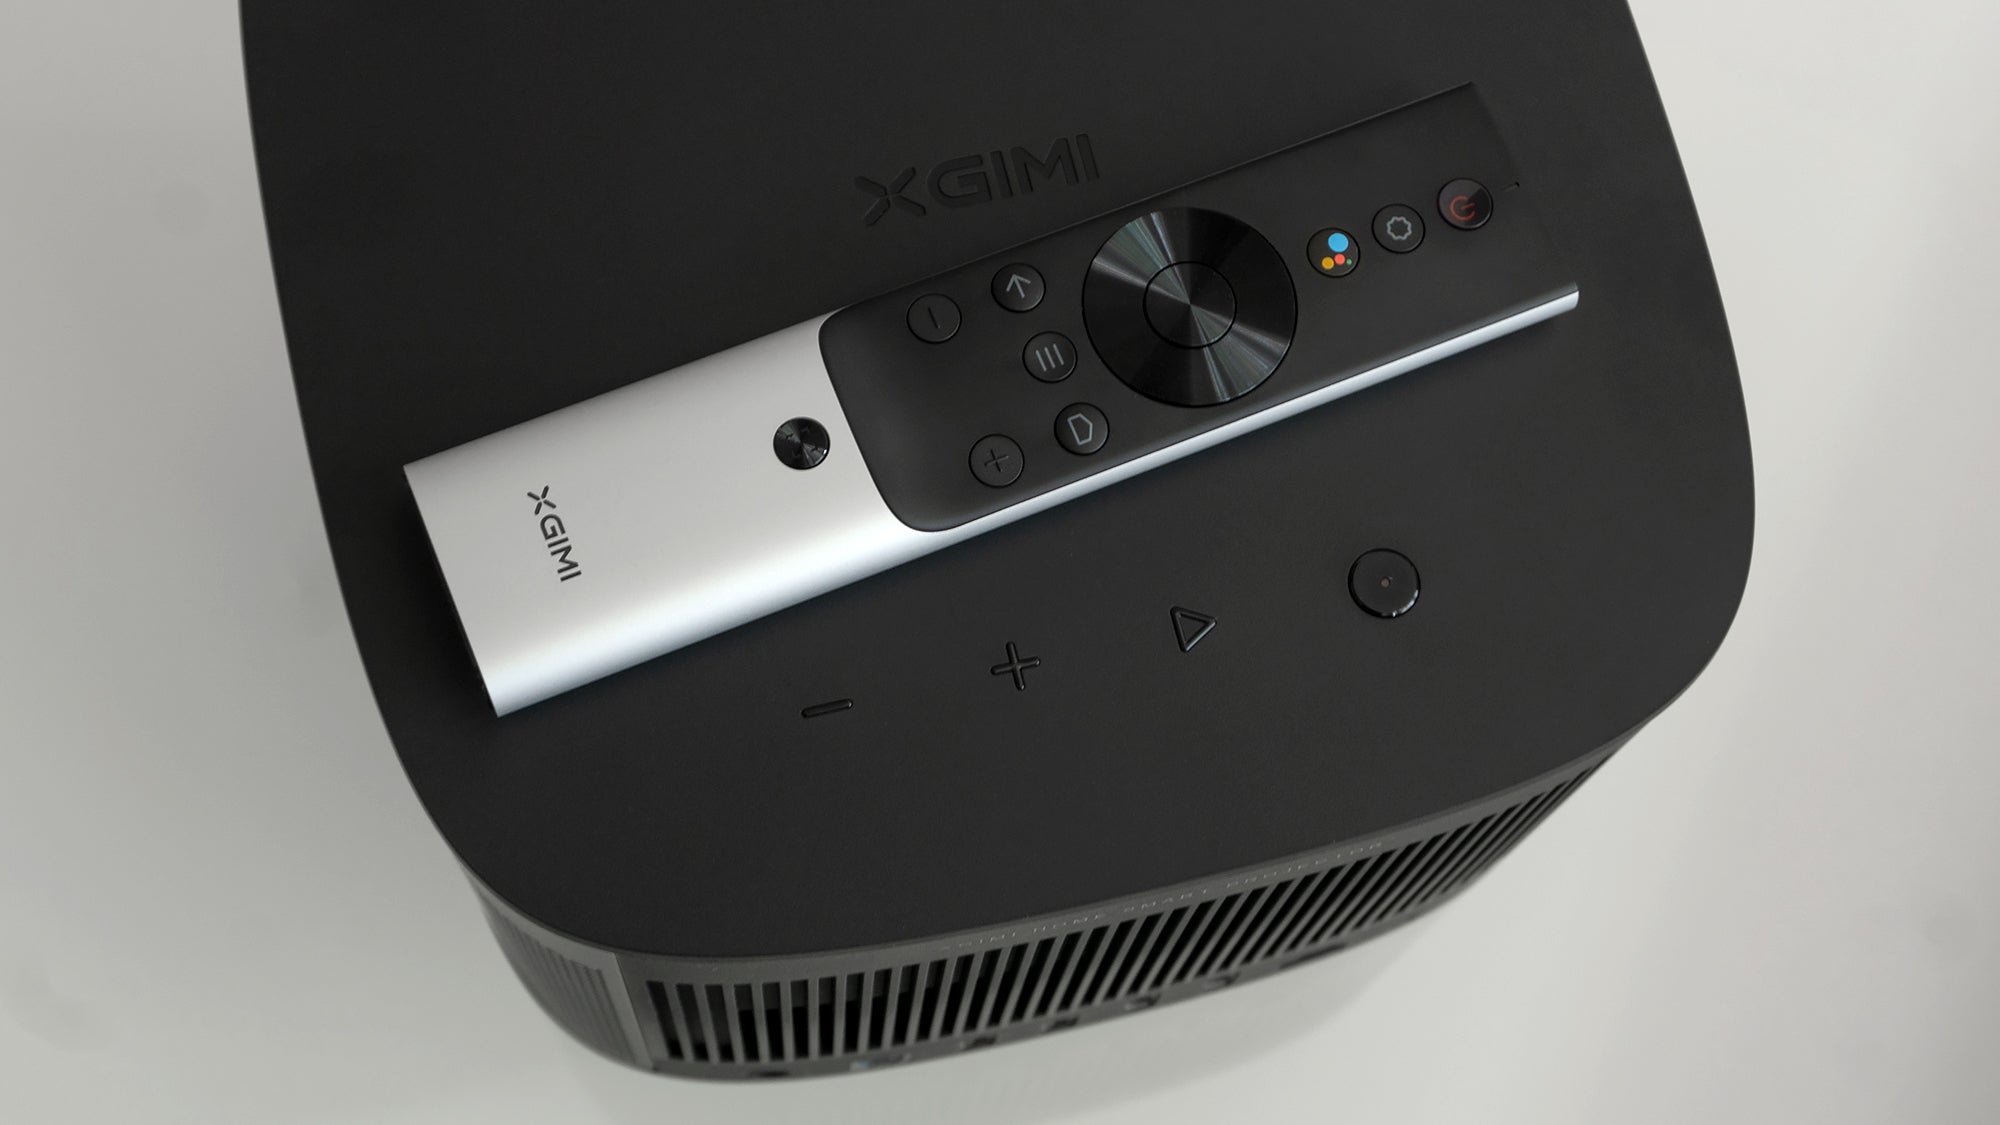 A limited set of redundant controls can be found atop the projector, but you won't want to lose that remote. (Photo: Andrew Liszewski/Gizmodo)